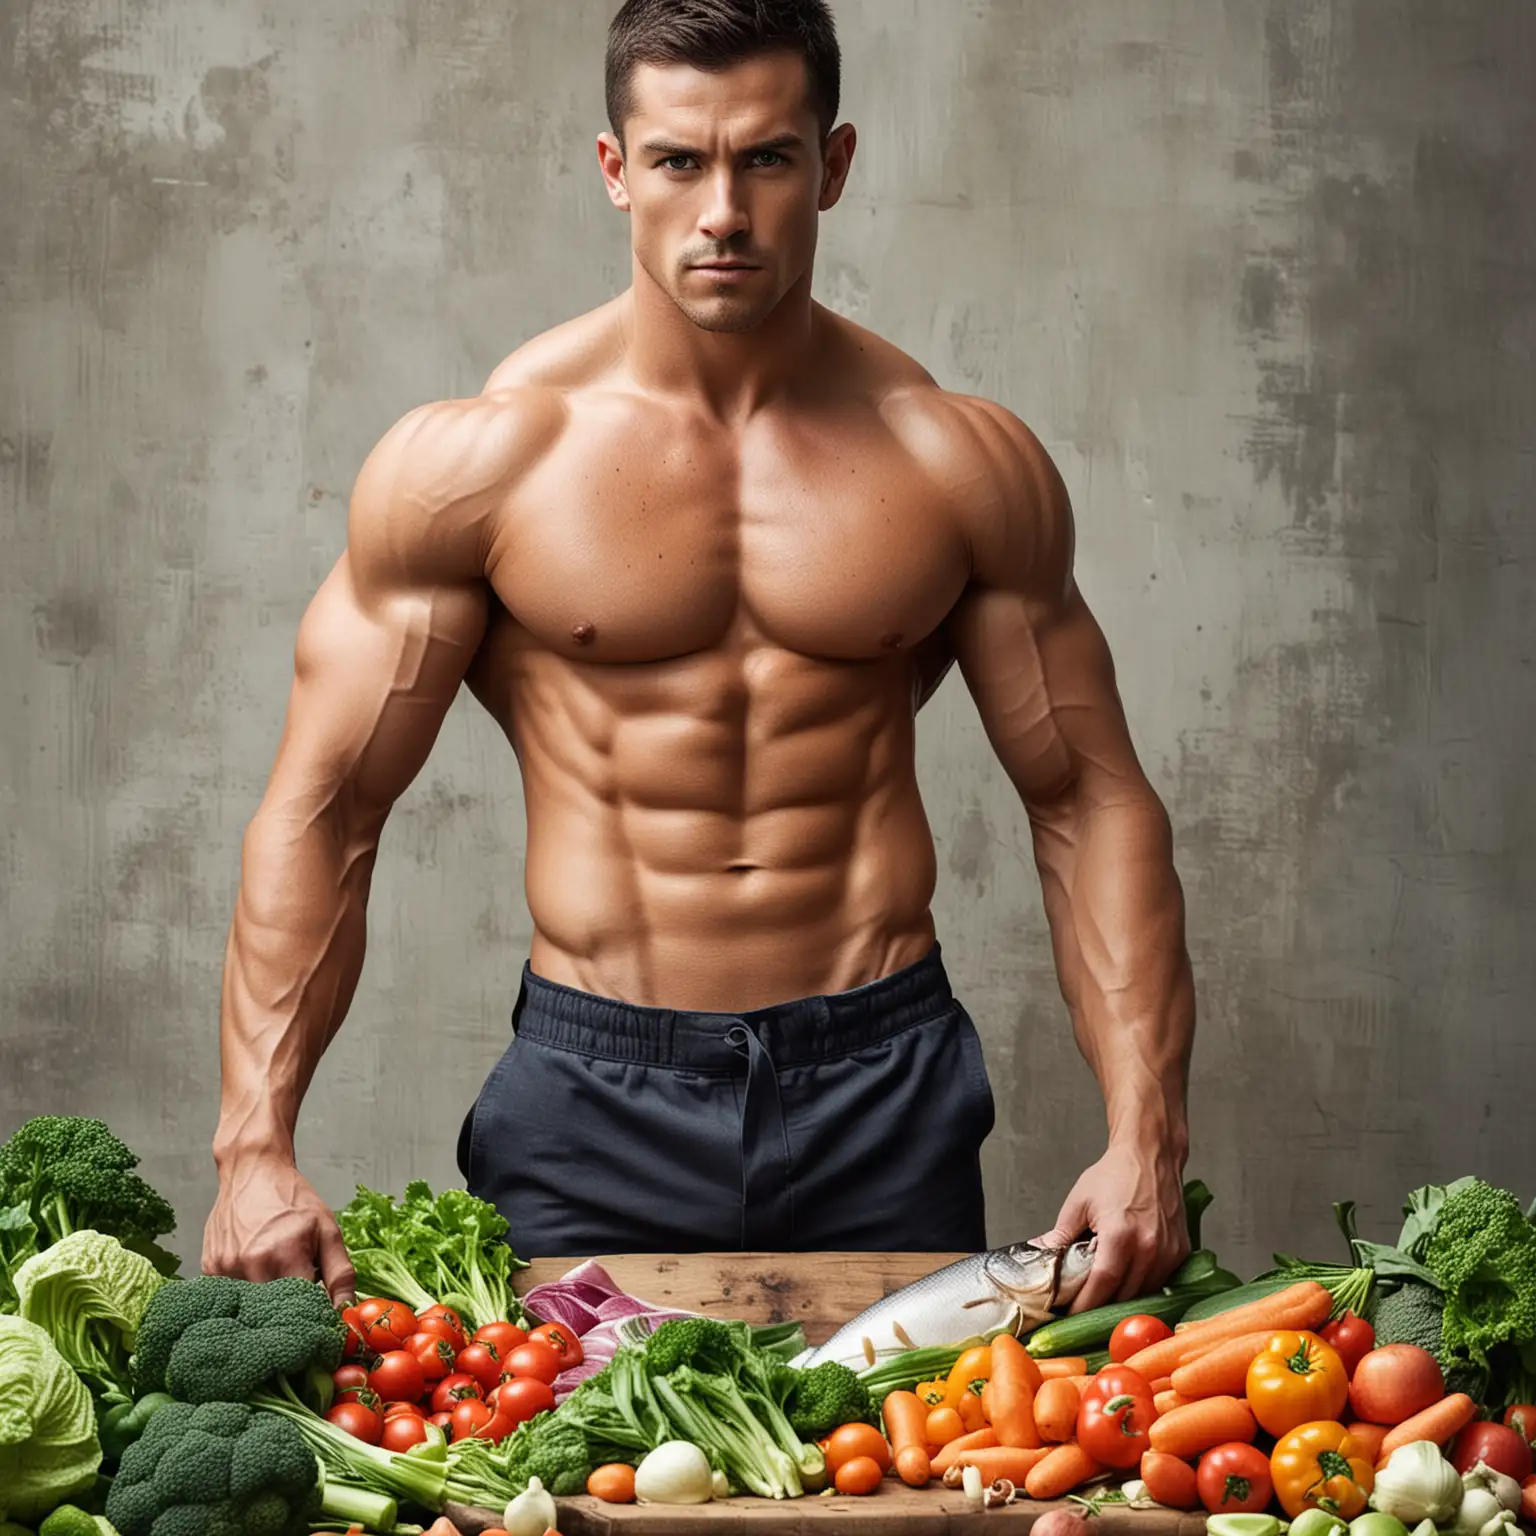 Warrior without shirt and has muscular abs currently cutting vegetables and fish